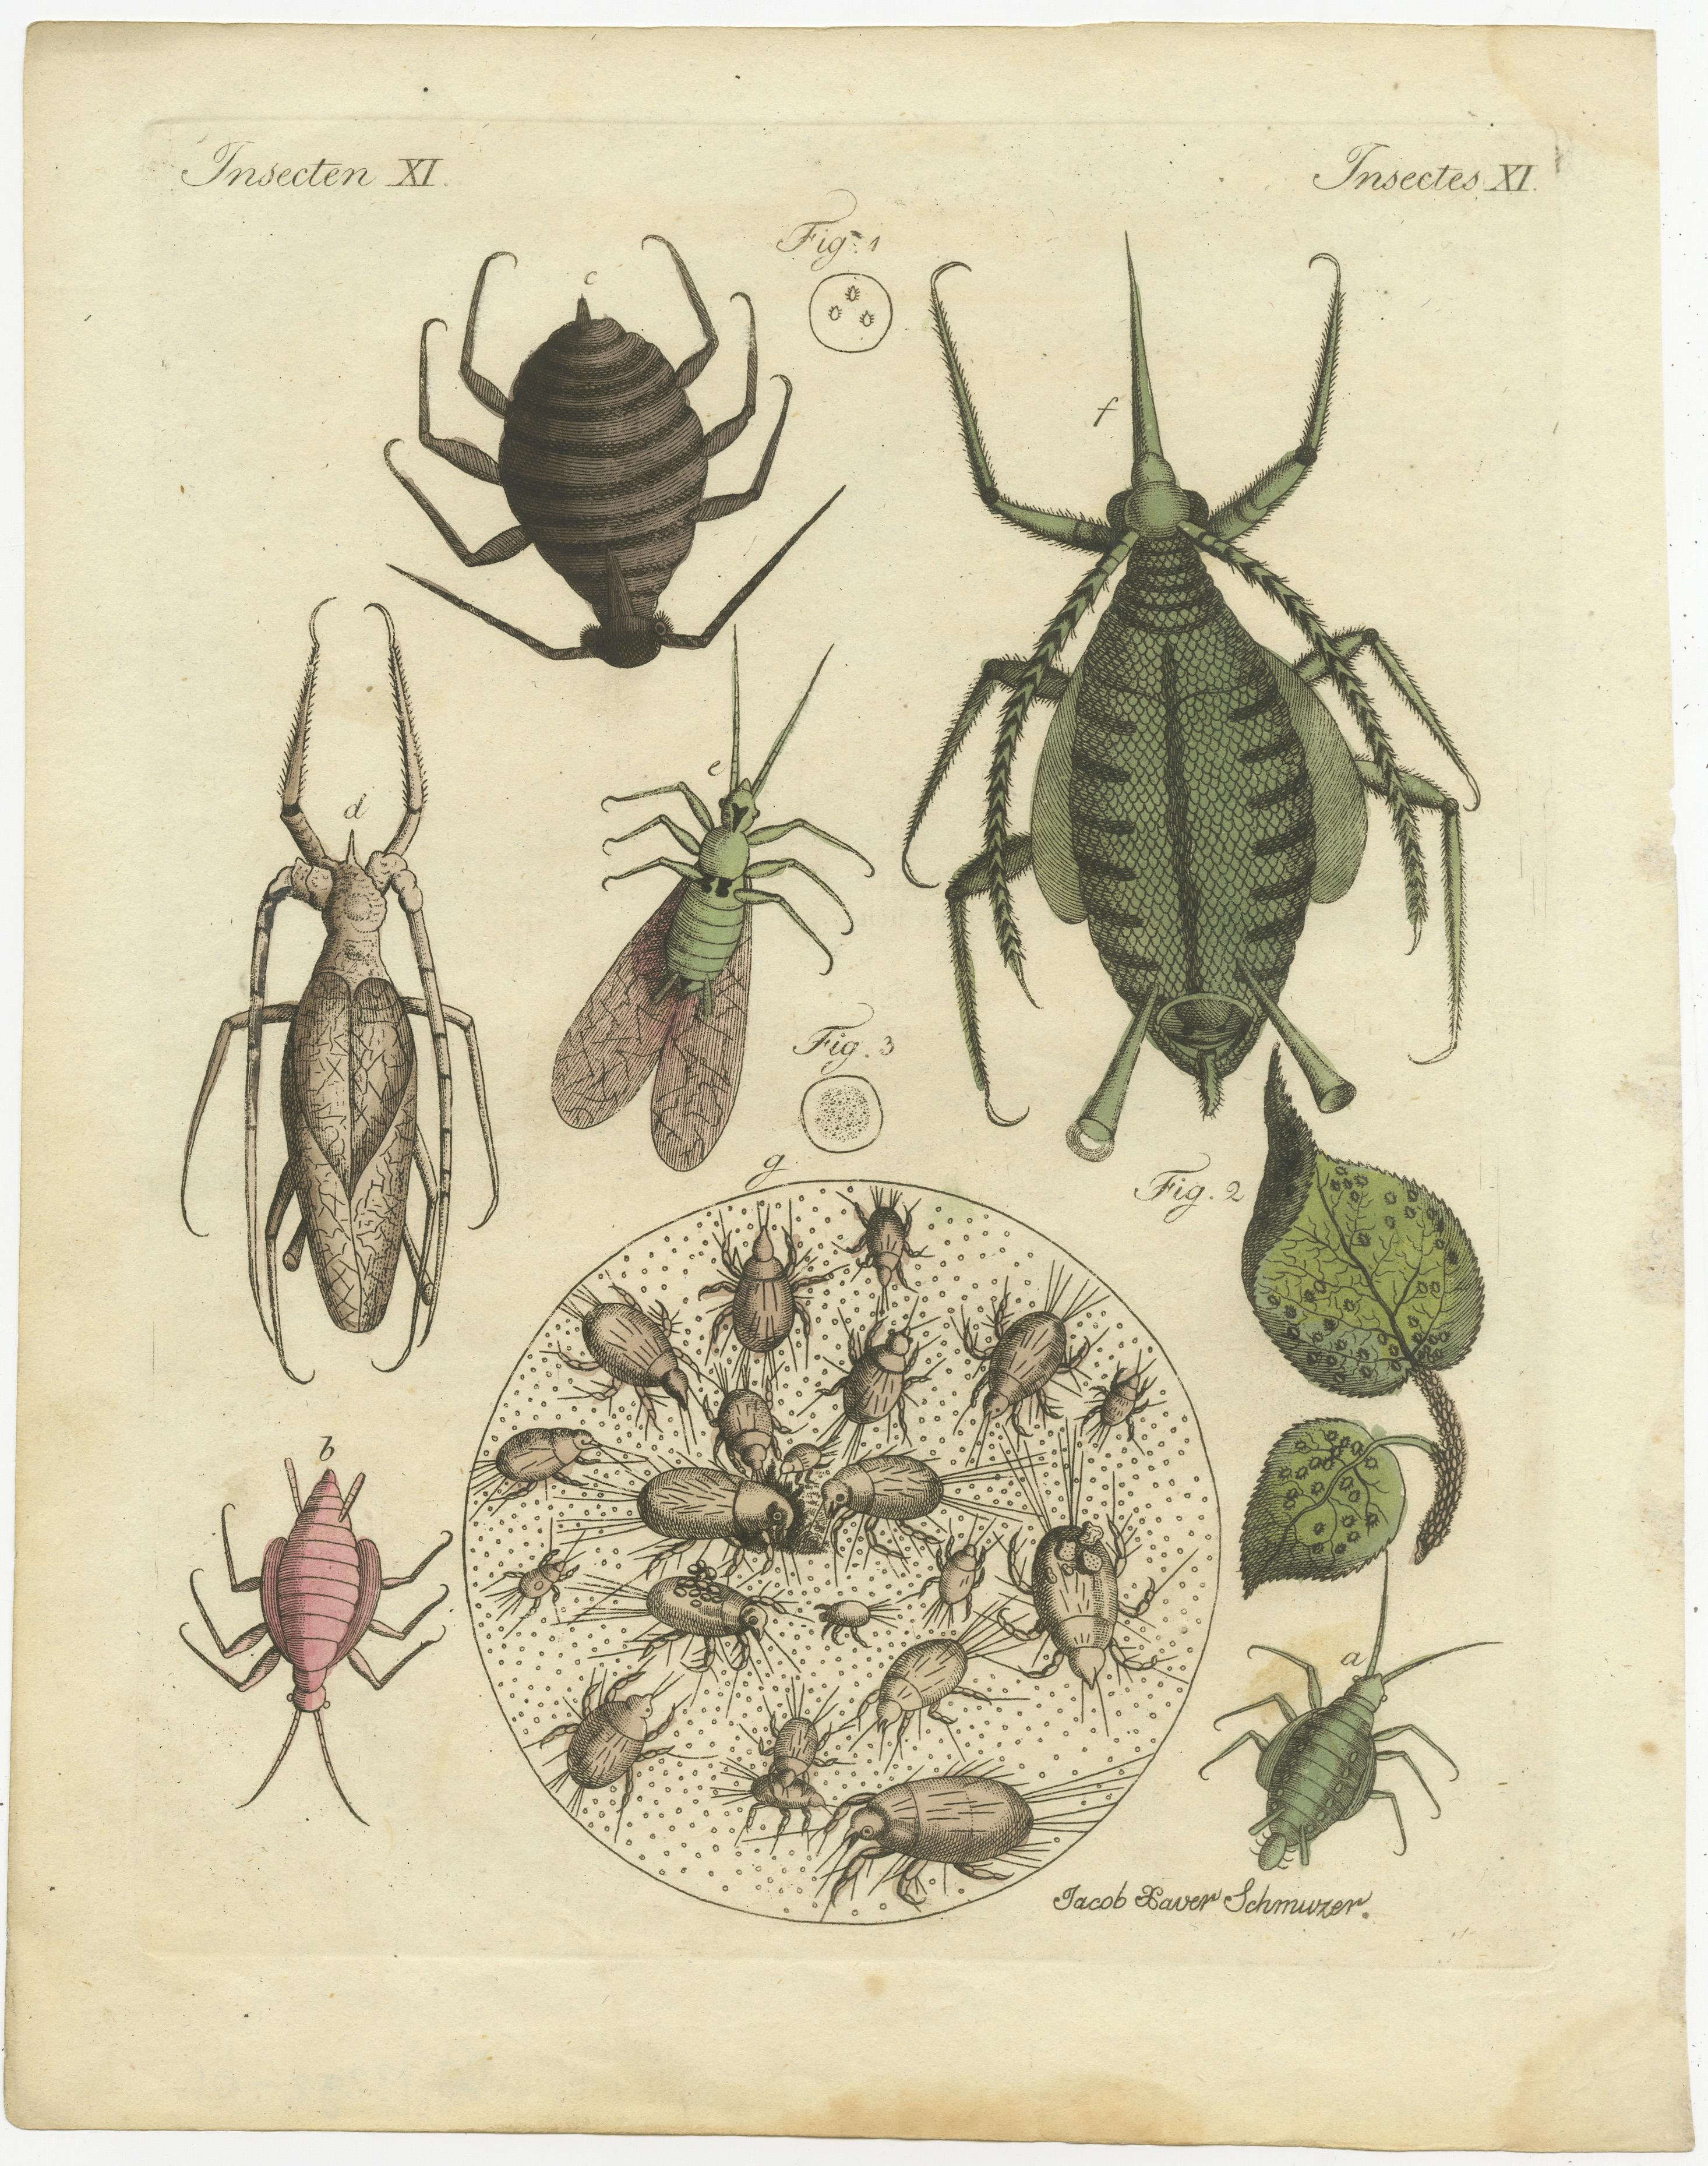 This original antique print shows aphid and other insects.

Originates from Bertuch's 'Bilderbuch für Kinder'. In 1790 Friedrich Justin Bertuch started his biggest book-project ever. Issued in 12 volumes it containes short articles written at a